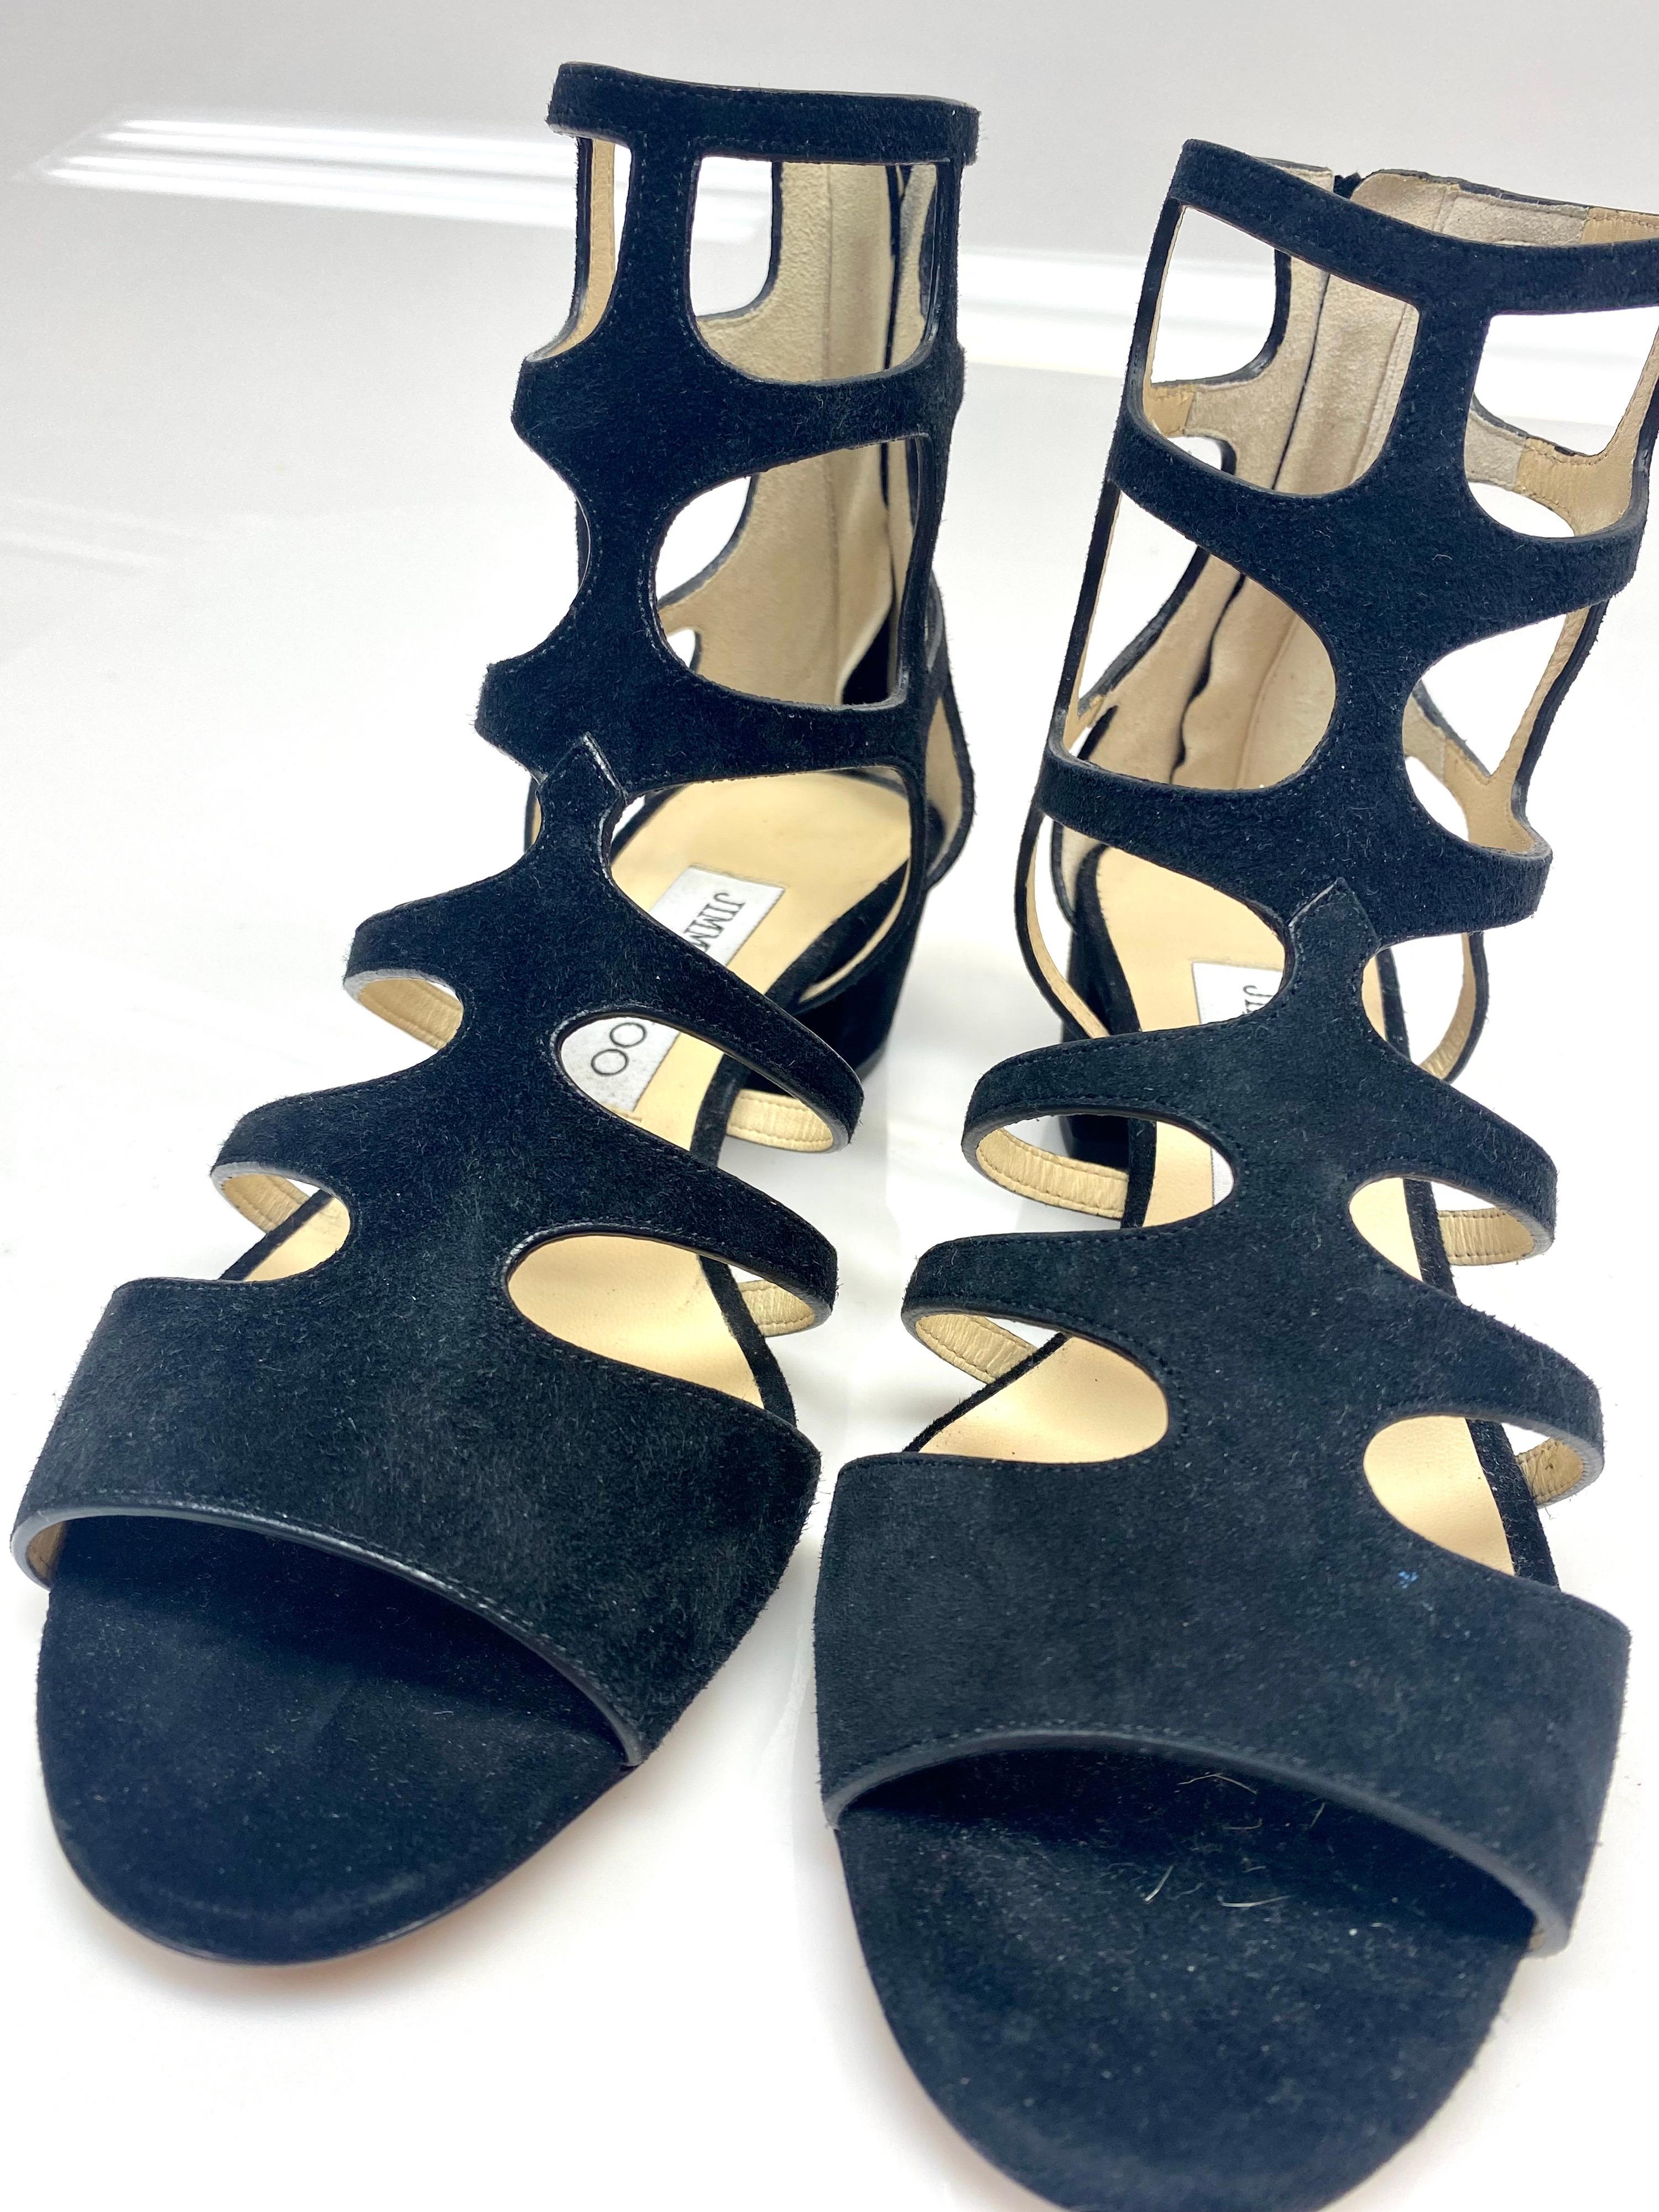 Women's Jimmy Choo Black Suede Gladiator Sandals - Size 36.5 For Sale